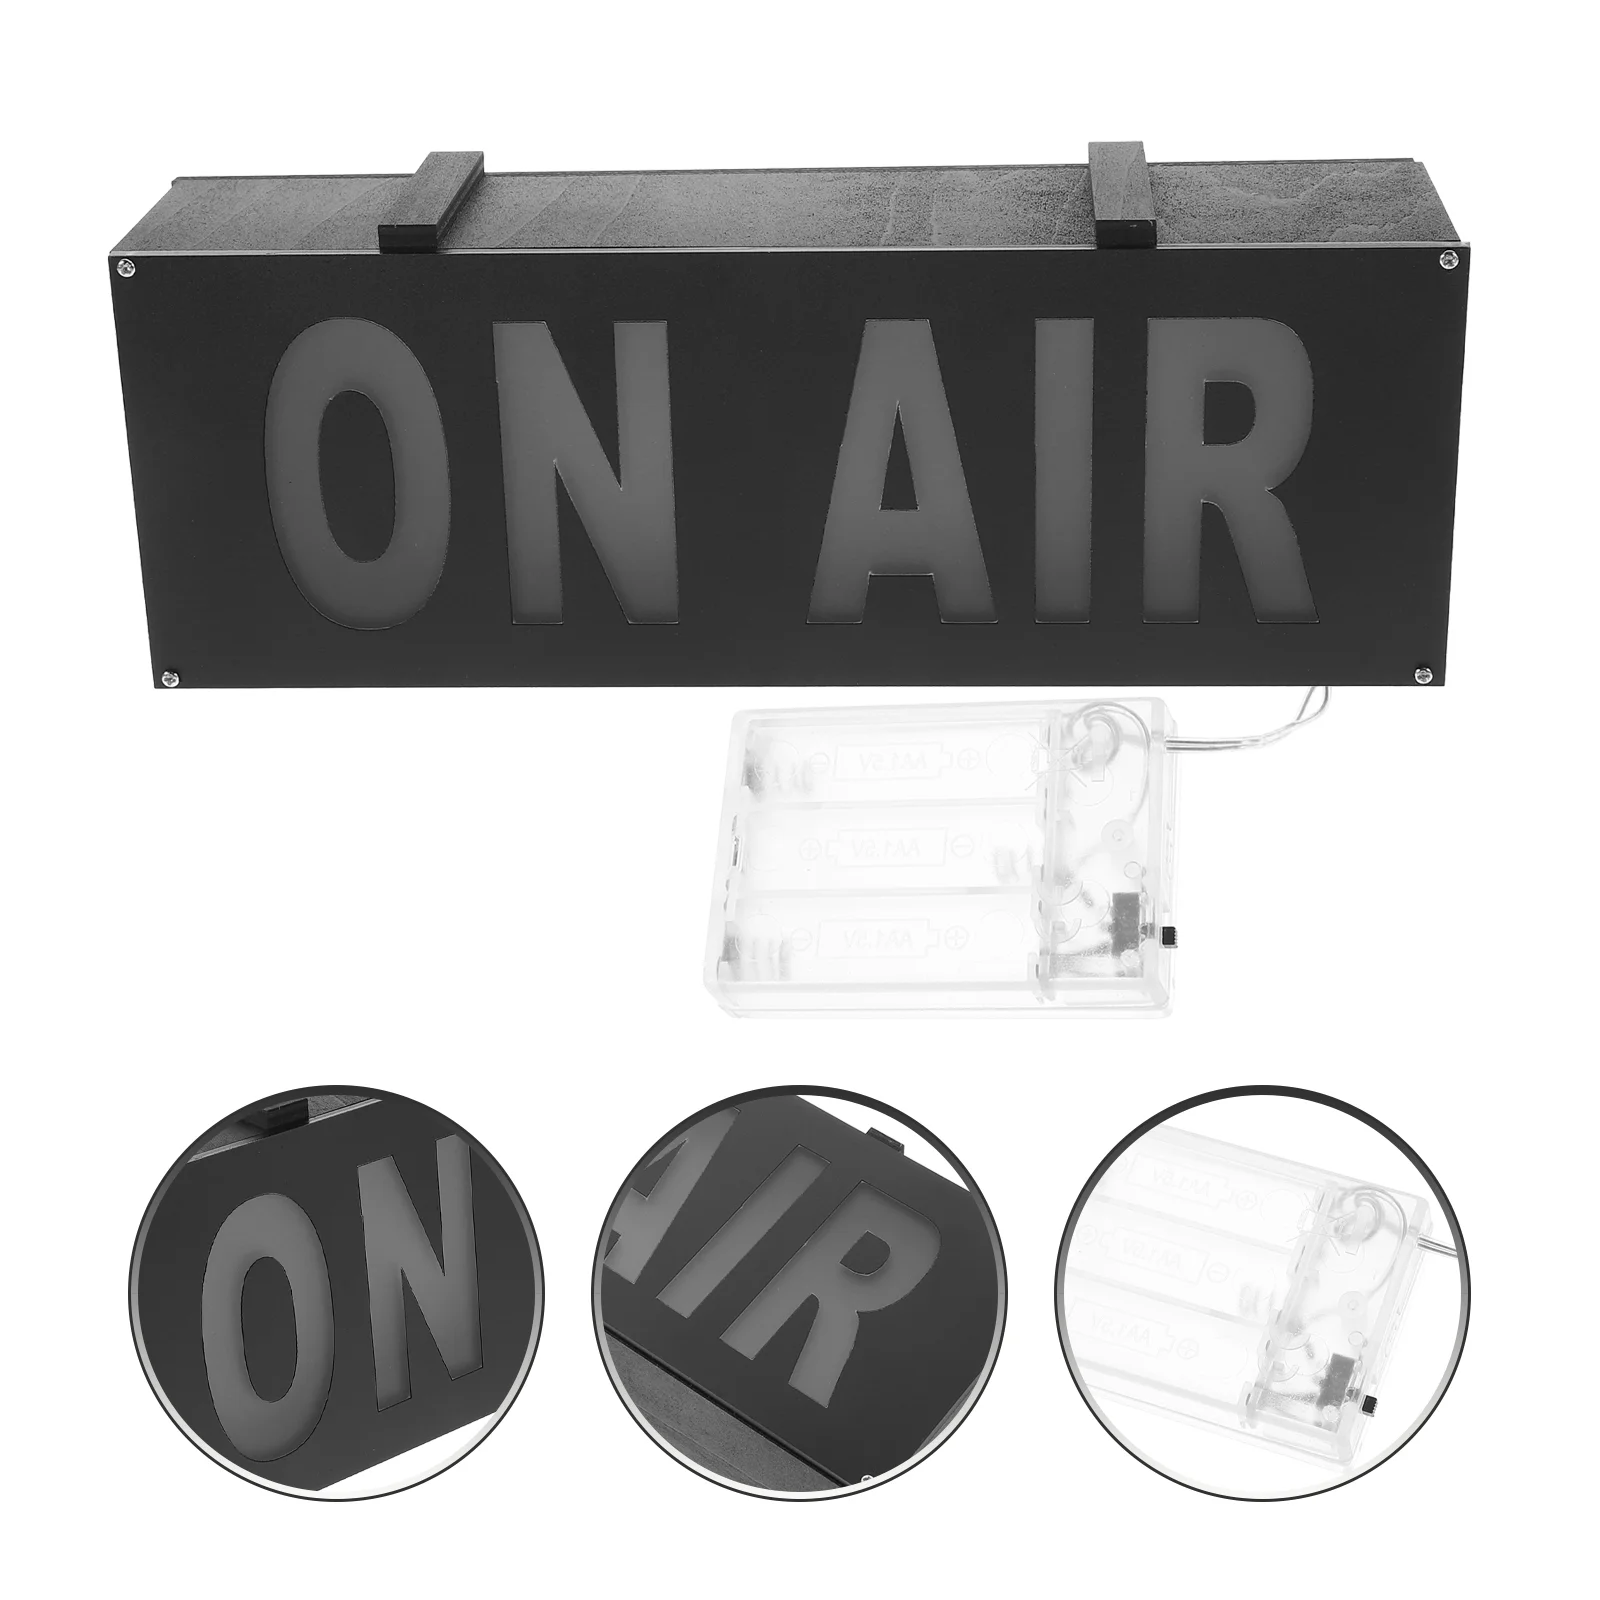 

ON AIR Sign LED Light Recording Sign Studio Warning Sign For Studio/Home Studio/Company/Desk Or Wall Decoration On Air Lightbox